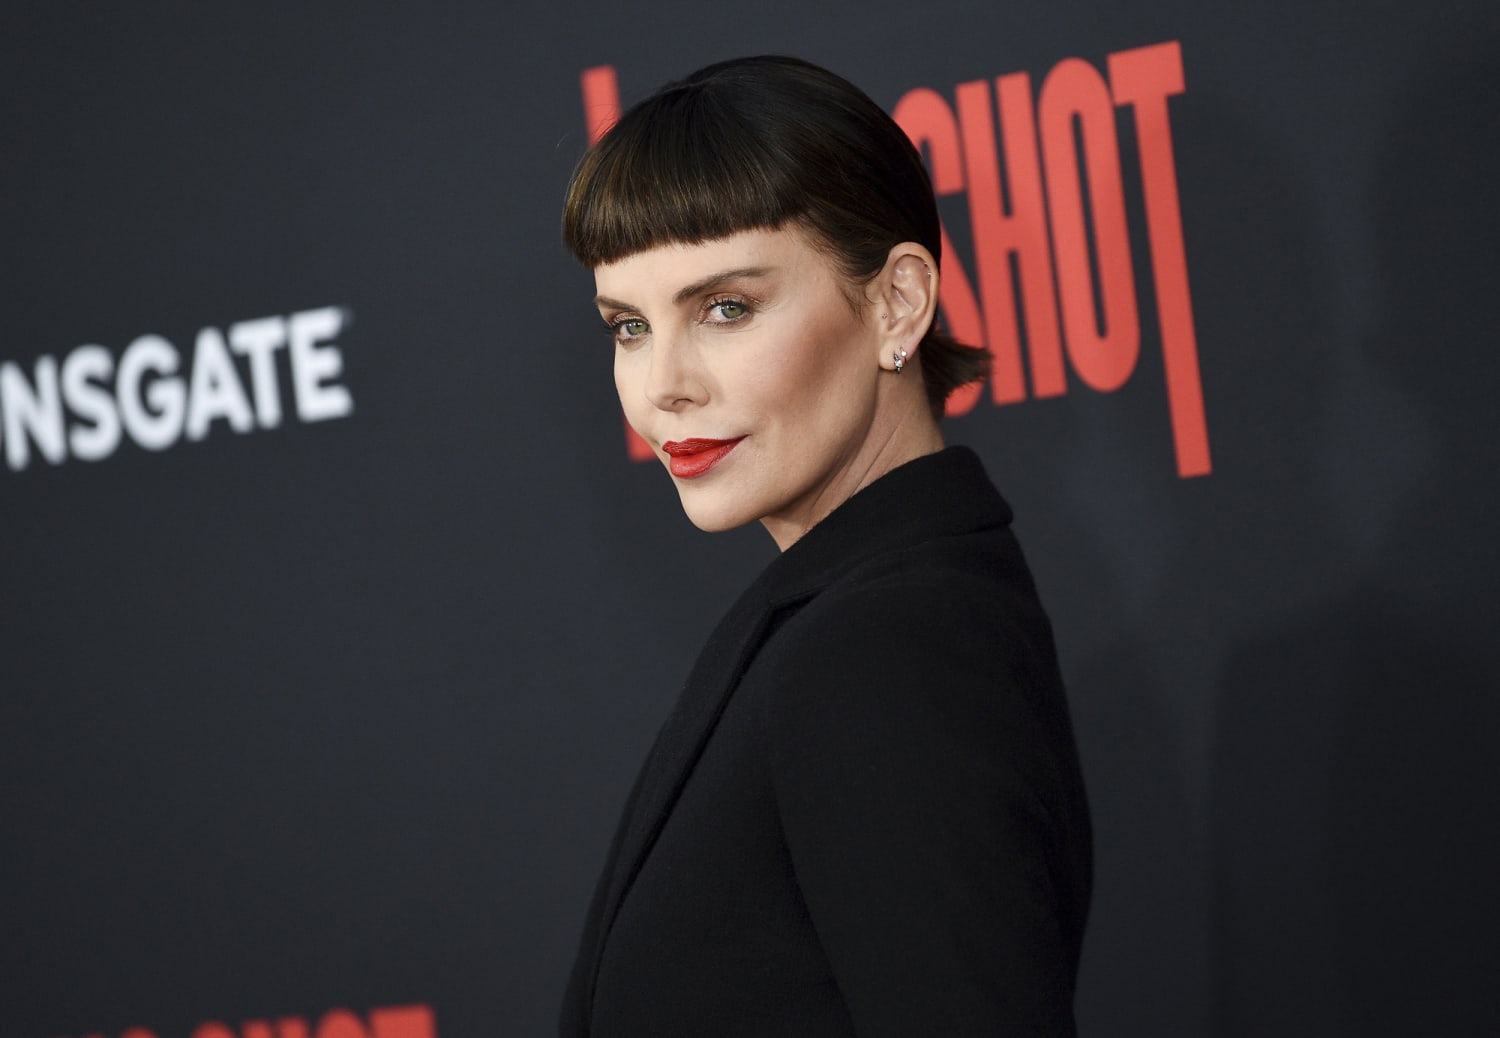 Charlize Theron has baby bangs on the red carpet